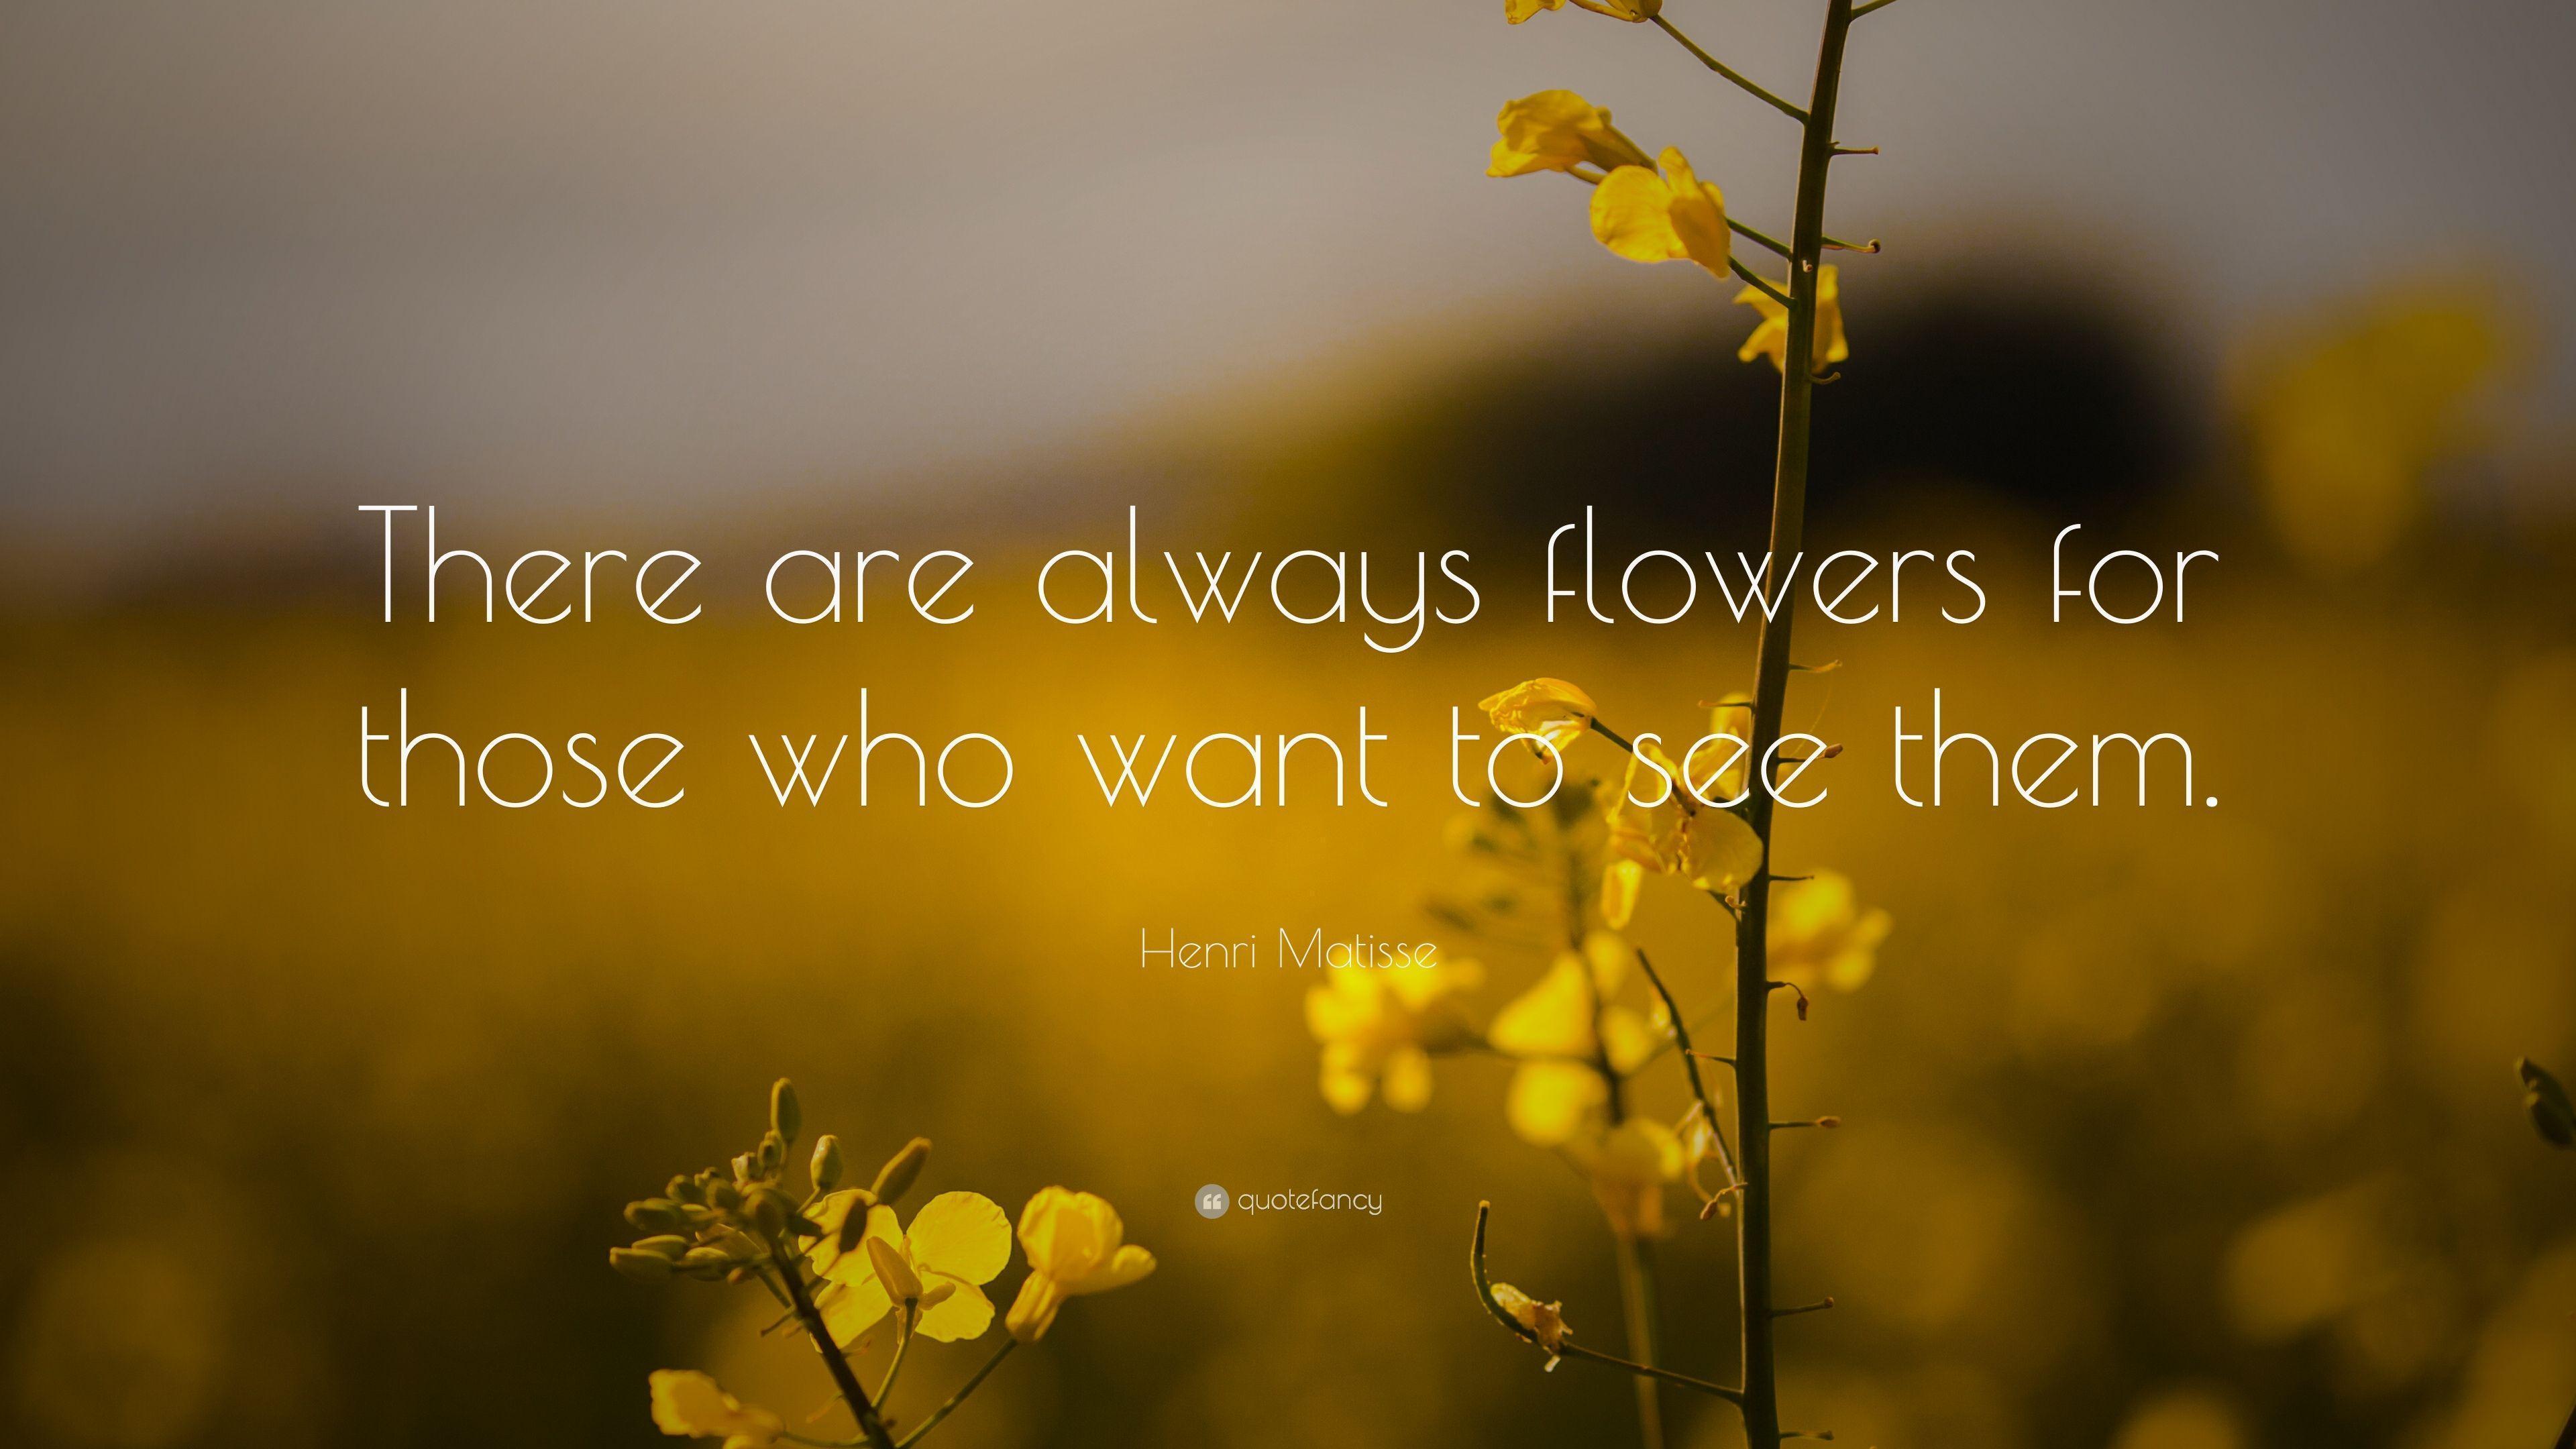 Henri Matisse Quote: “There are always flowers for those who want